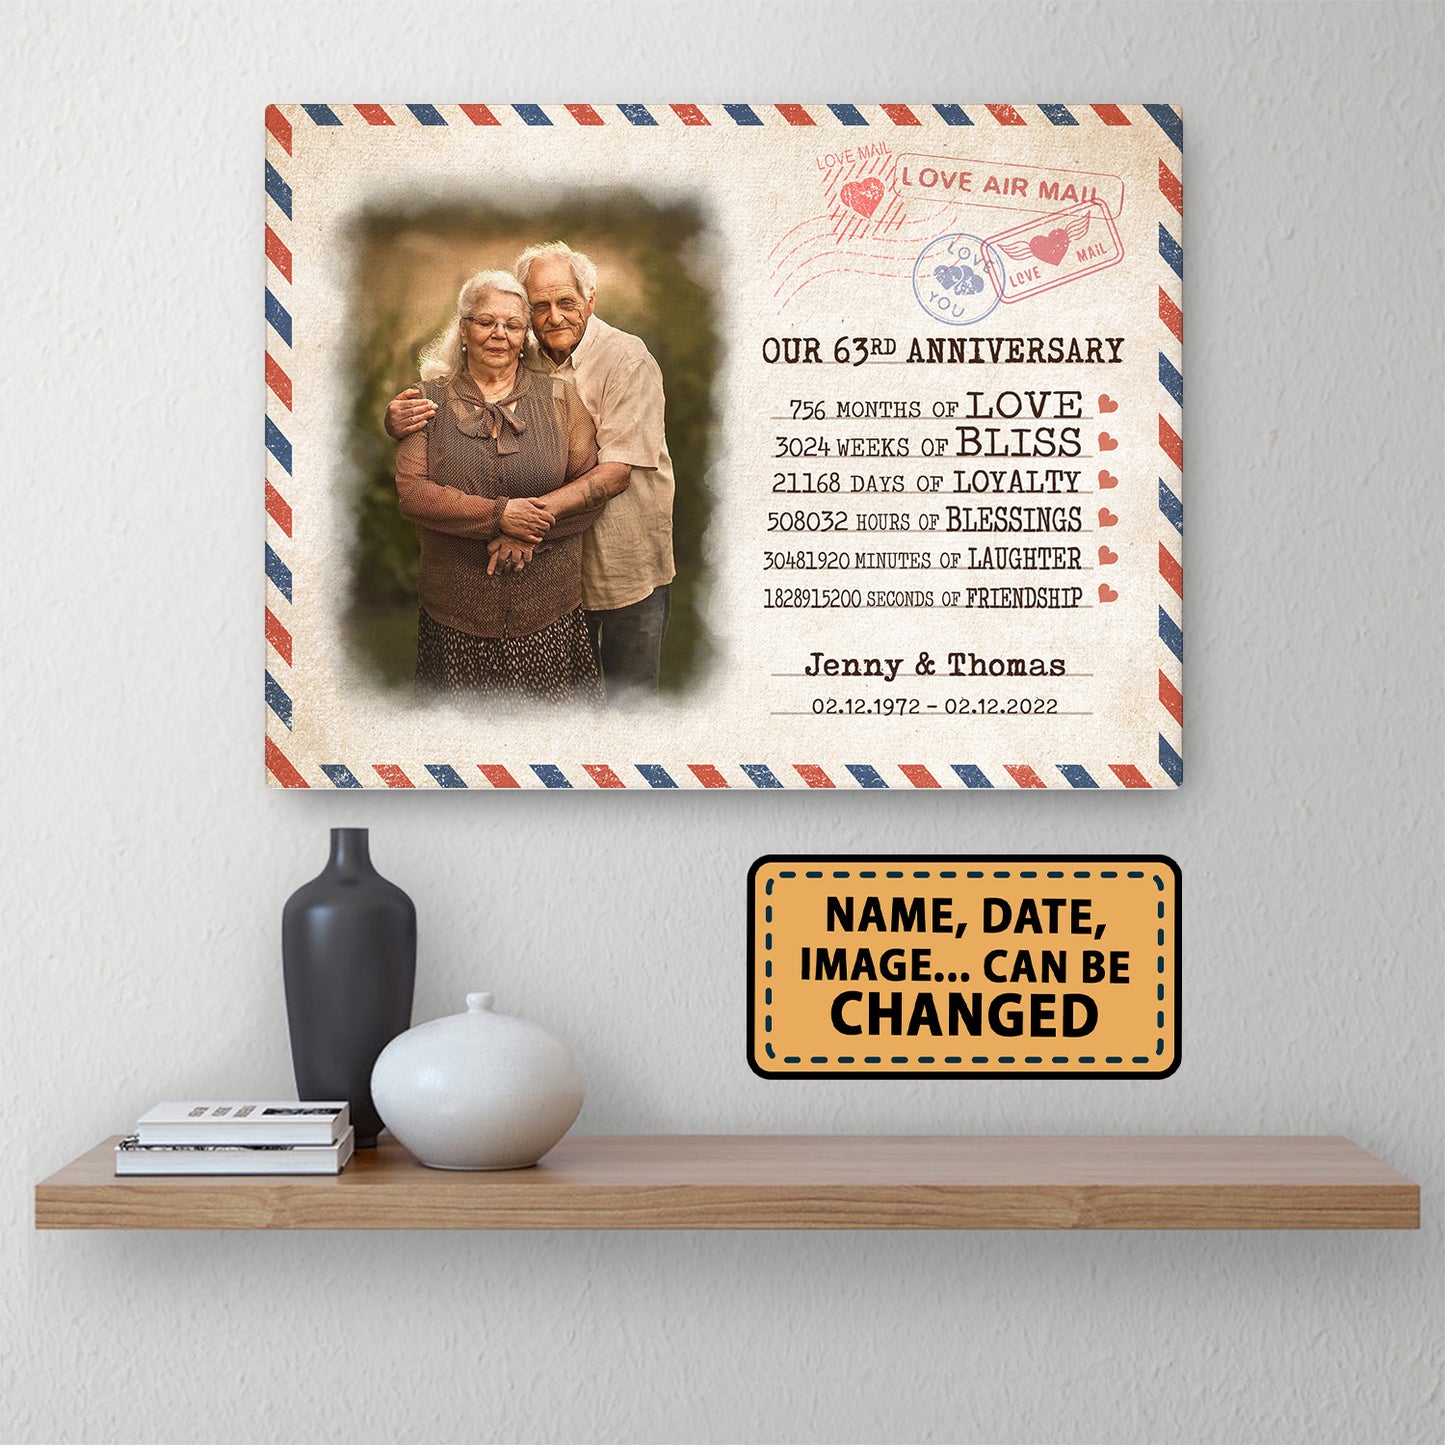 Our 63rd Anniversary Letter Valentine Gift Personalized Canvas